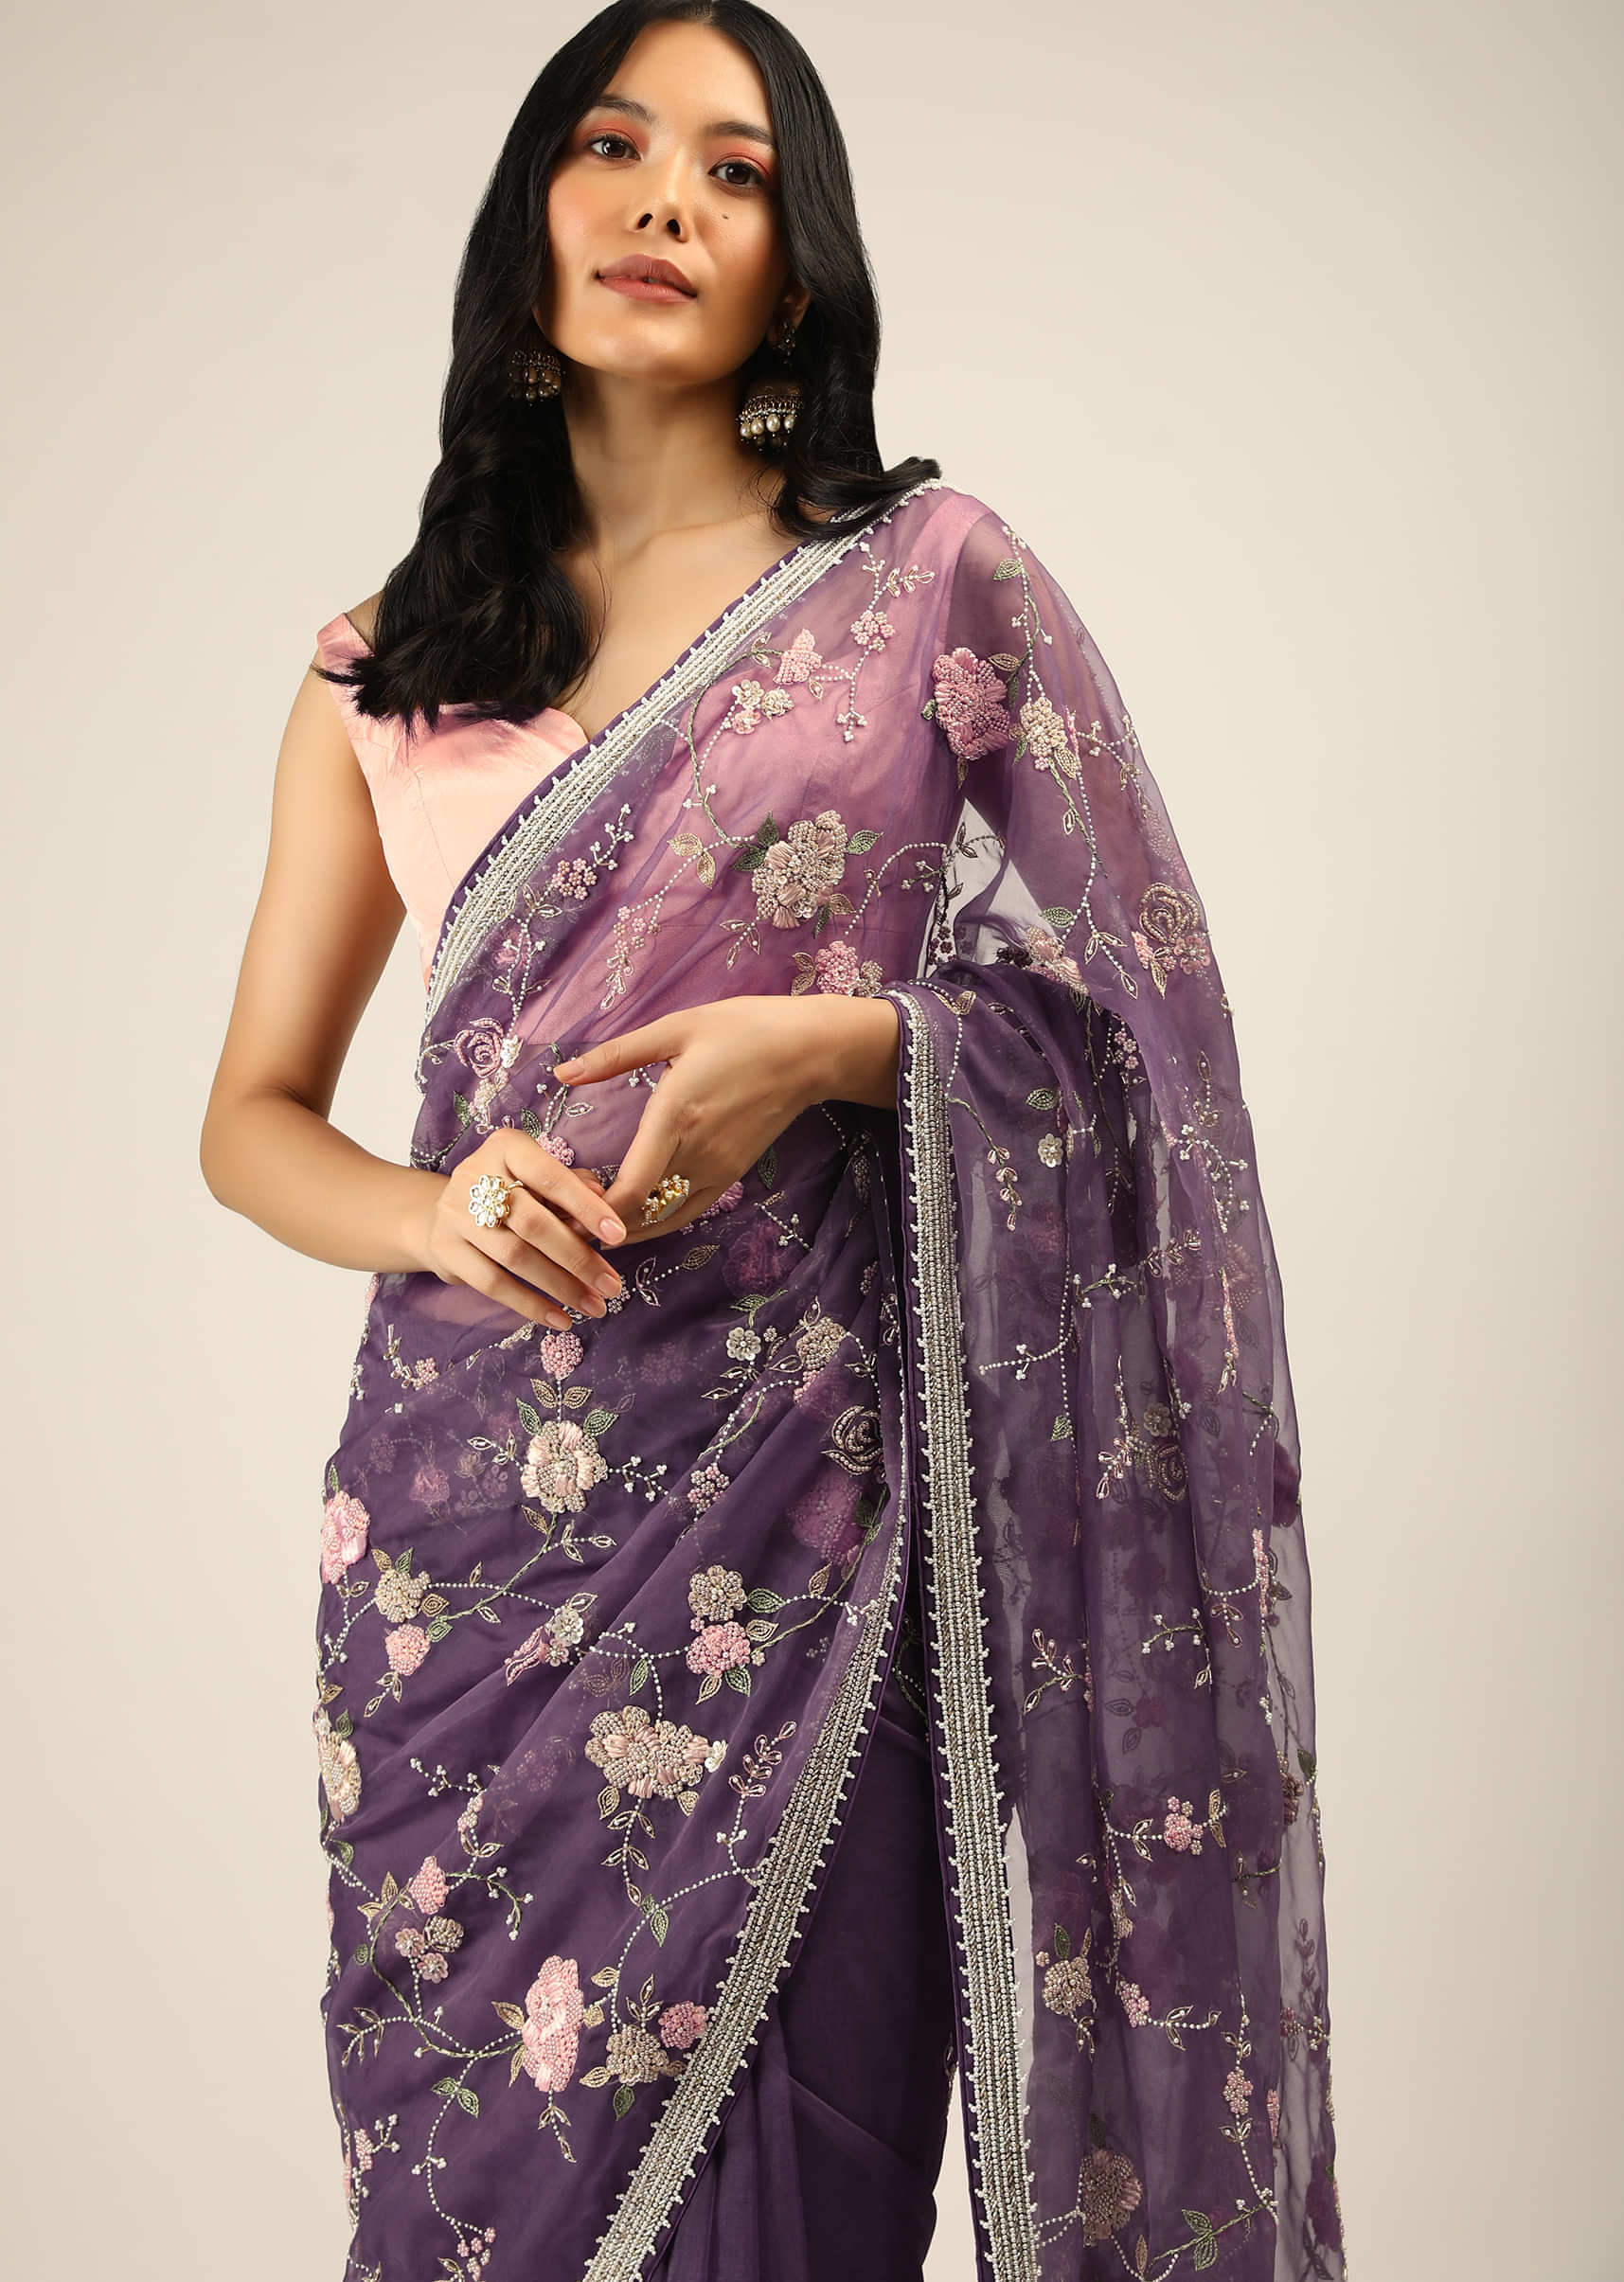 Royal Purple Saree In Organza With Moti, Resham And Cord Embroidered Floral Motifs On The Pallu  